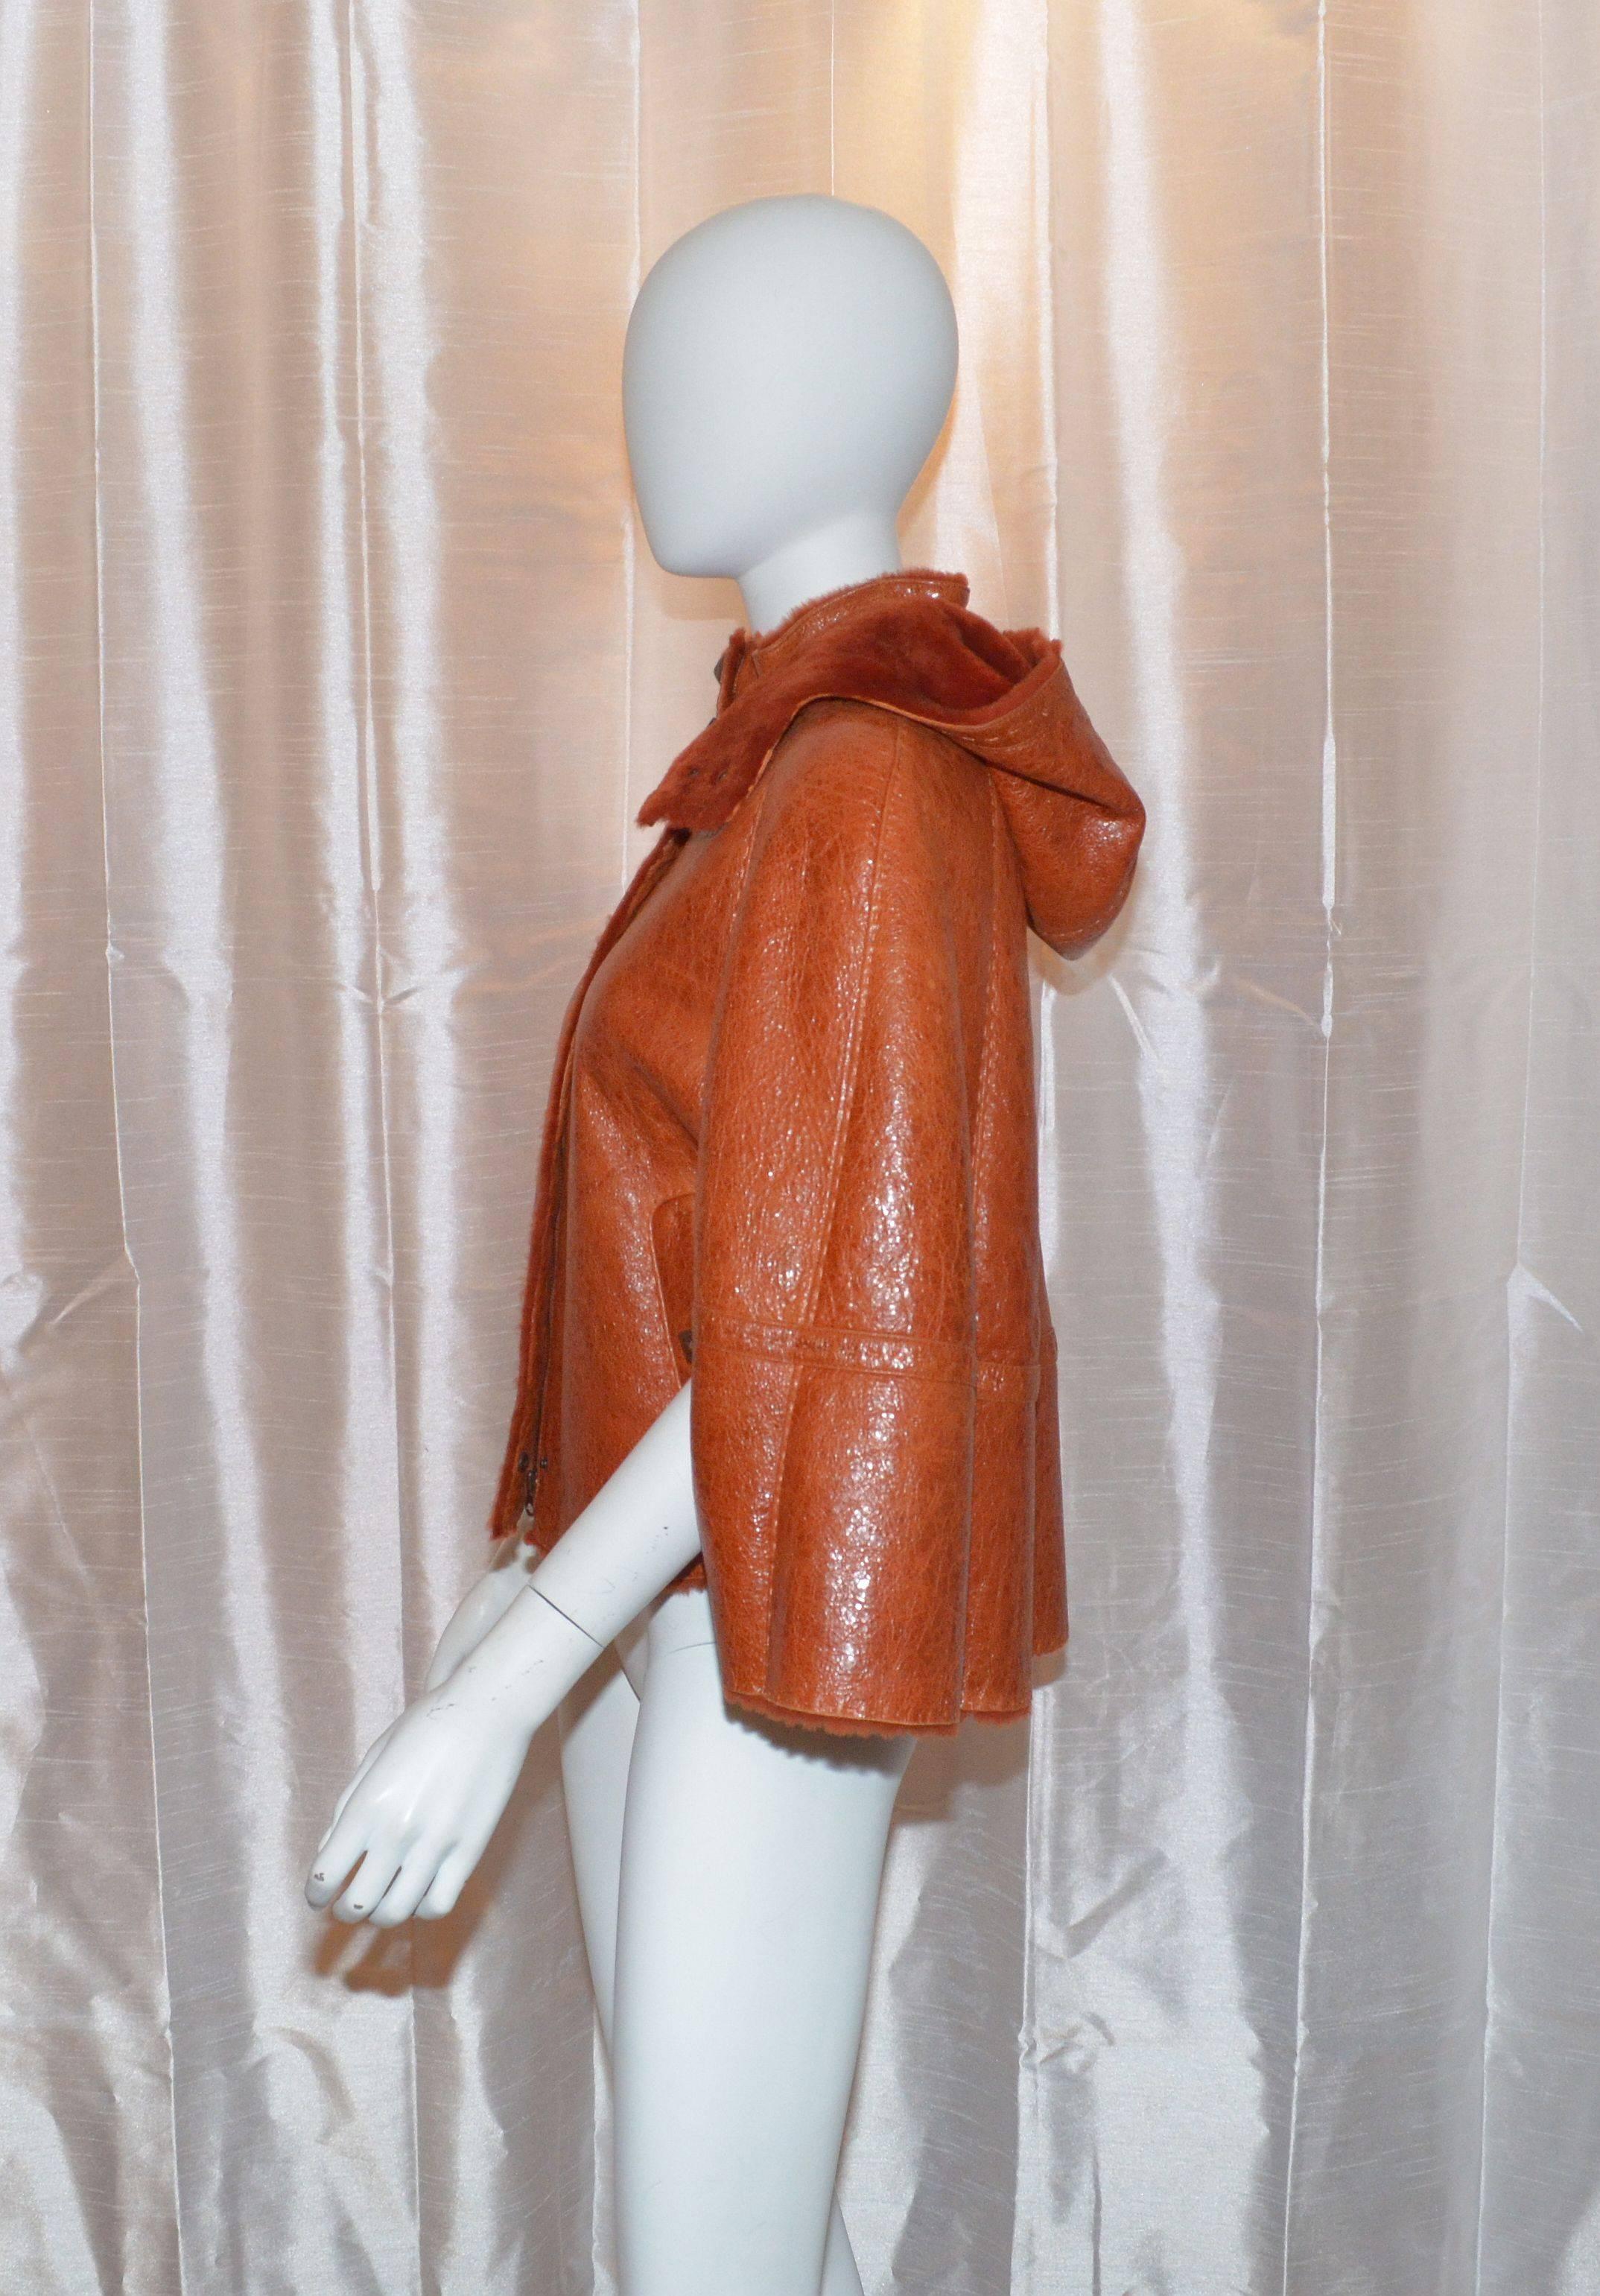 Escada Sport Burnt Orange Lambskin Leather Shearling Fur Poncho Cape w/ Hood

Escada cape features a full zipper closure along the front center, snap stud closures at the neck, arm hole inserts, and two pockets also with snap stud closures. Hood